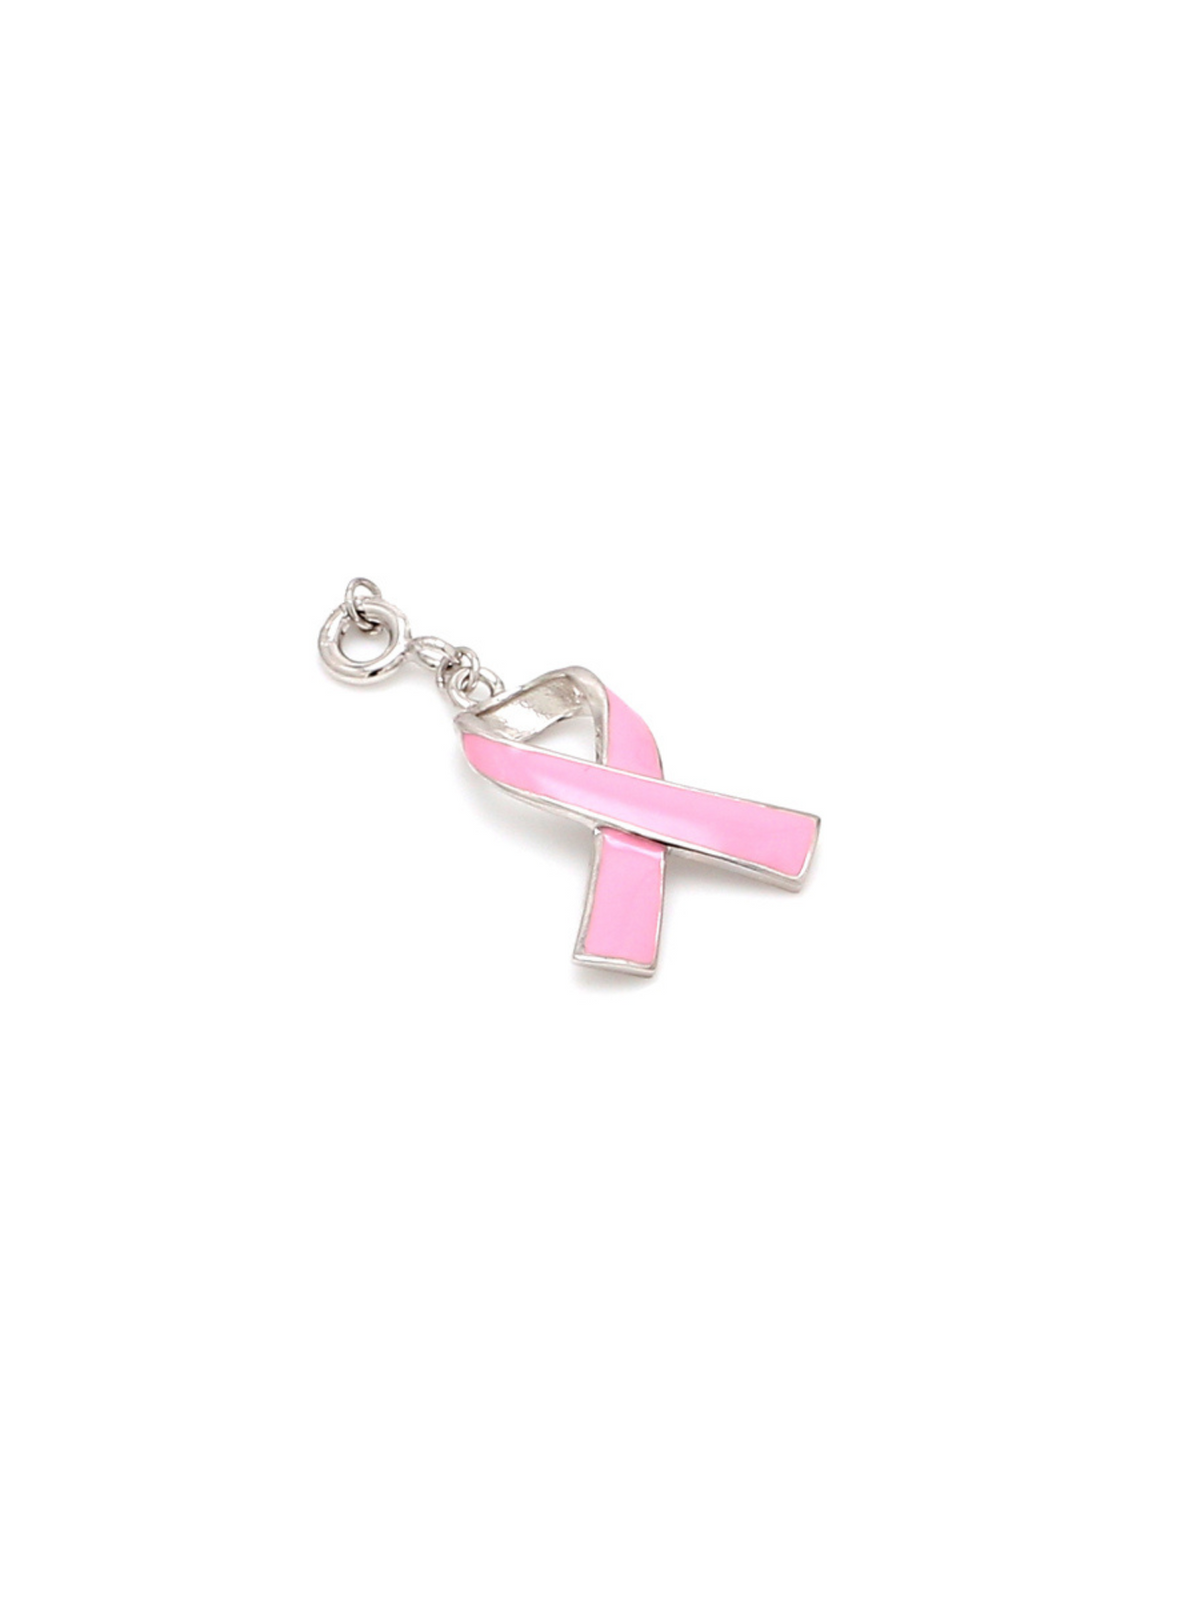 PINK RIBBON BREAST CANCER CHARM - PURE 925 STERLING SILVER